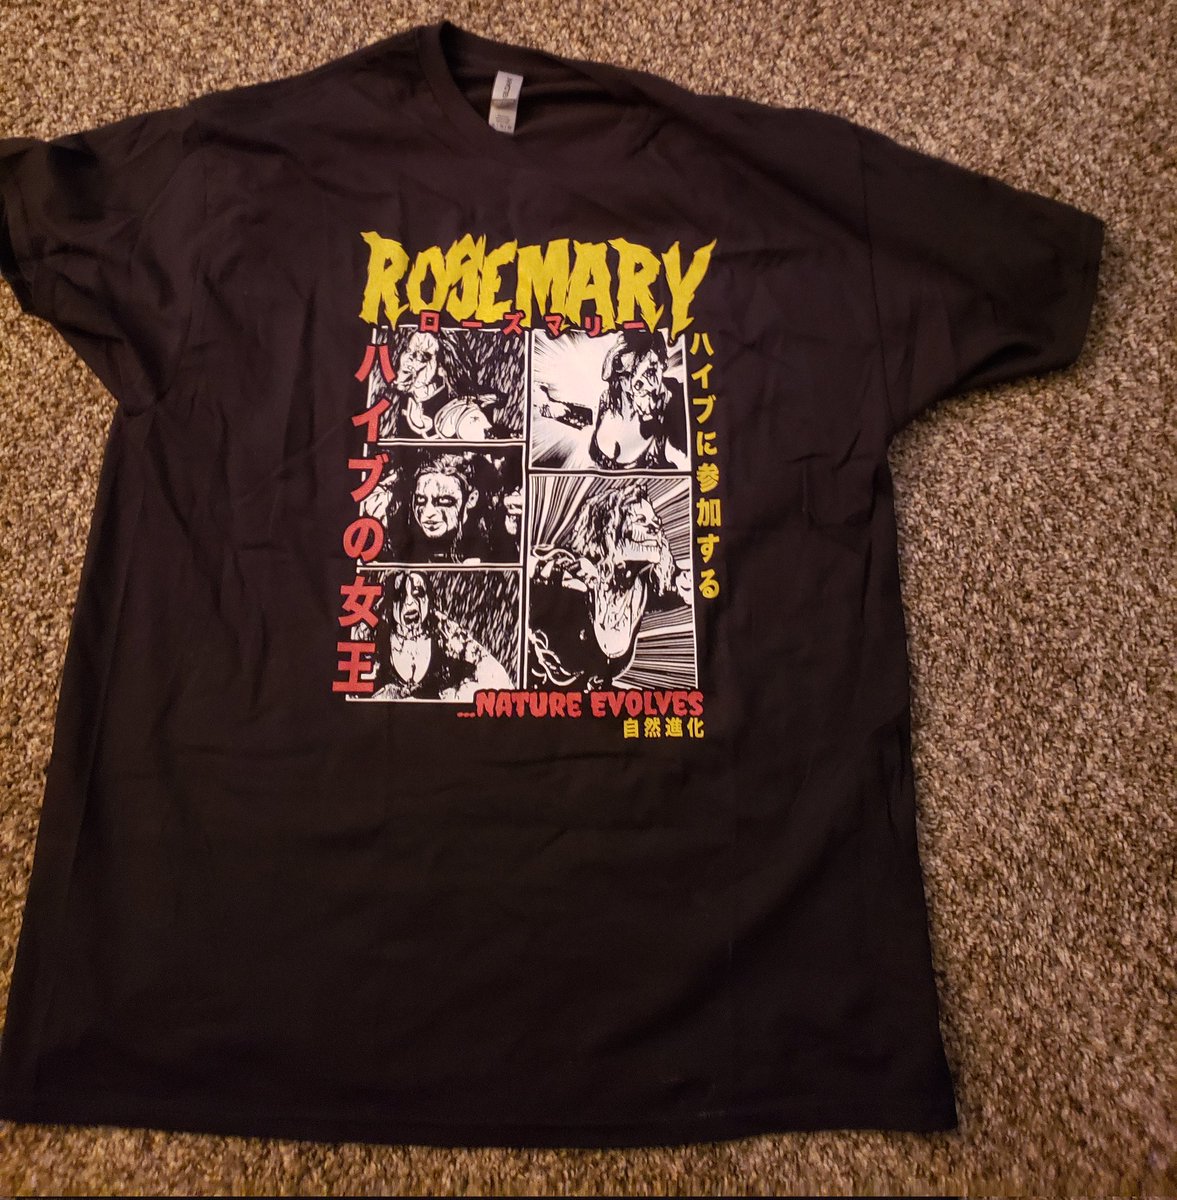 #MultiverseMailCall We got @WeAreRosemary Nature Evolves shirt today from @PWTees😈 #DecayingThroughTheDecades 
#Decay #DemonAssassian #DeathDealer